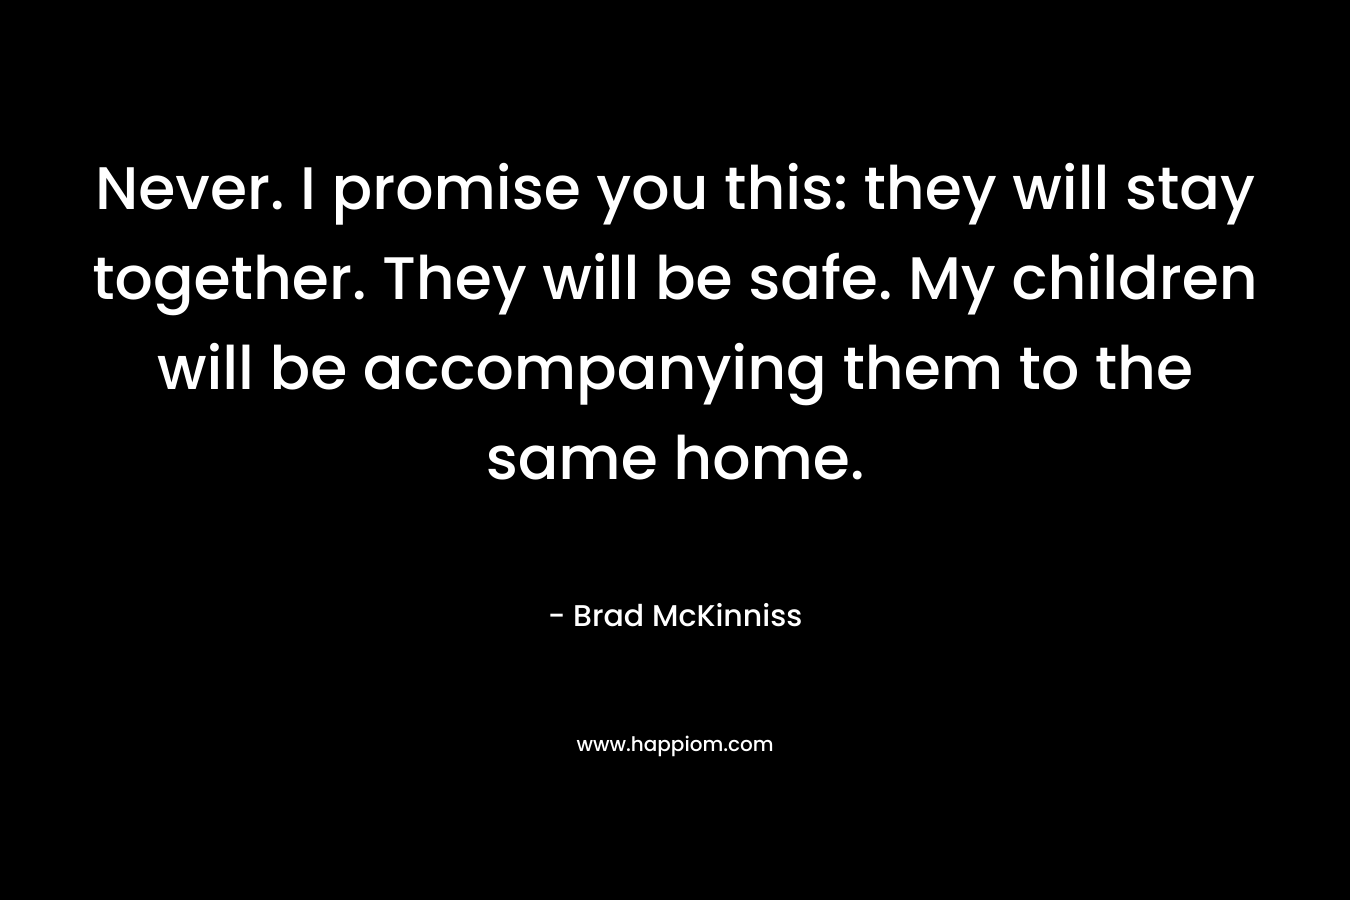 Never. I promise you this: they will stay together. They will be safe. My children will be accompanying them to the same home. – Brad McKinniss